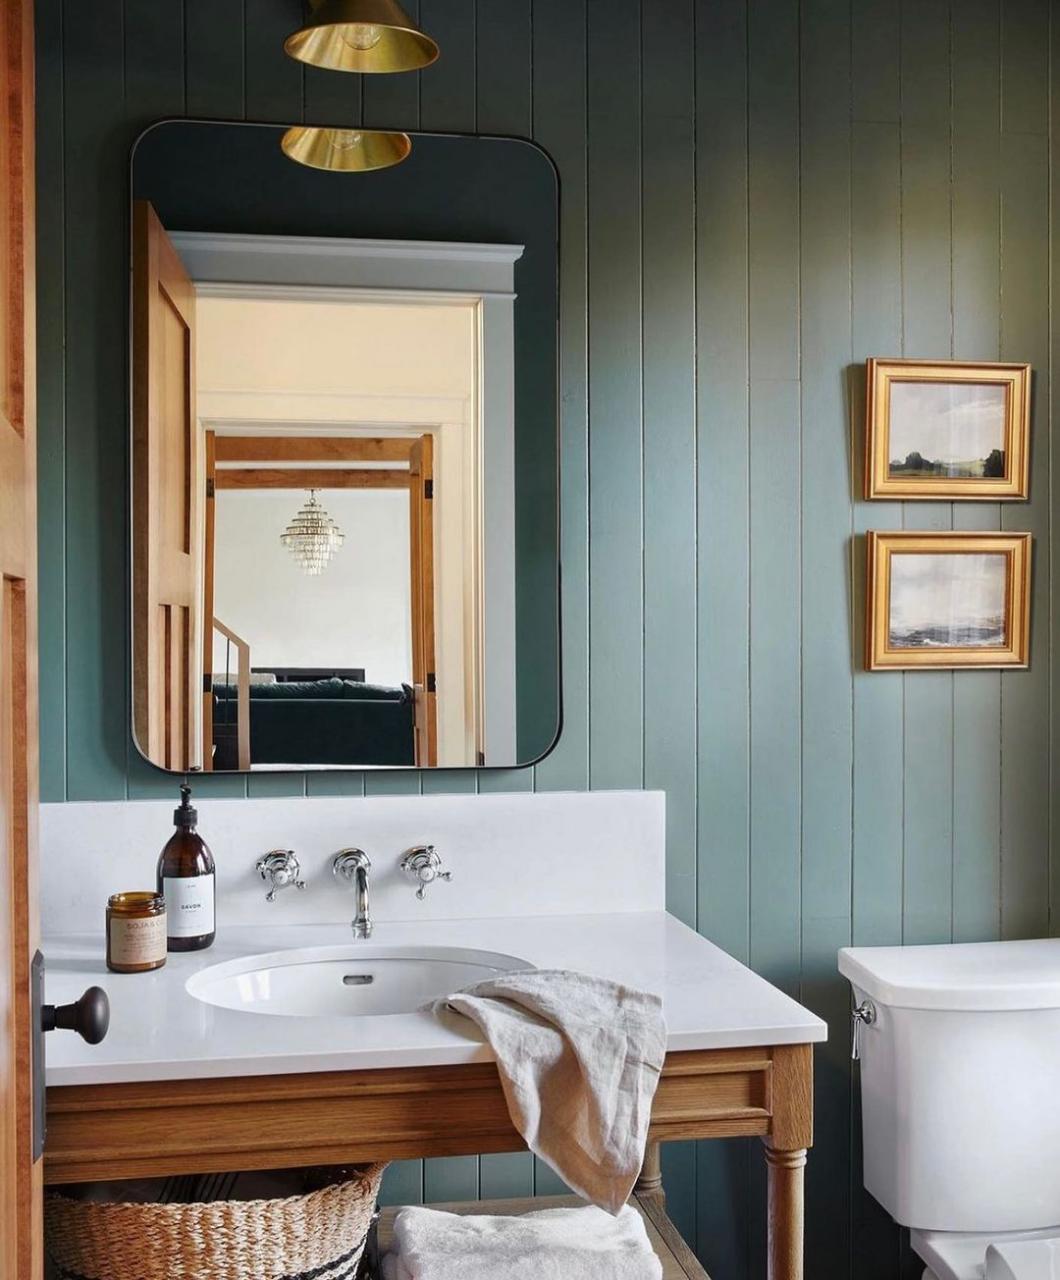 This Rustic Home Company on Instagram “This bathroom is perfection. I